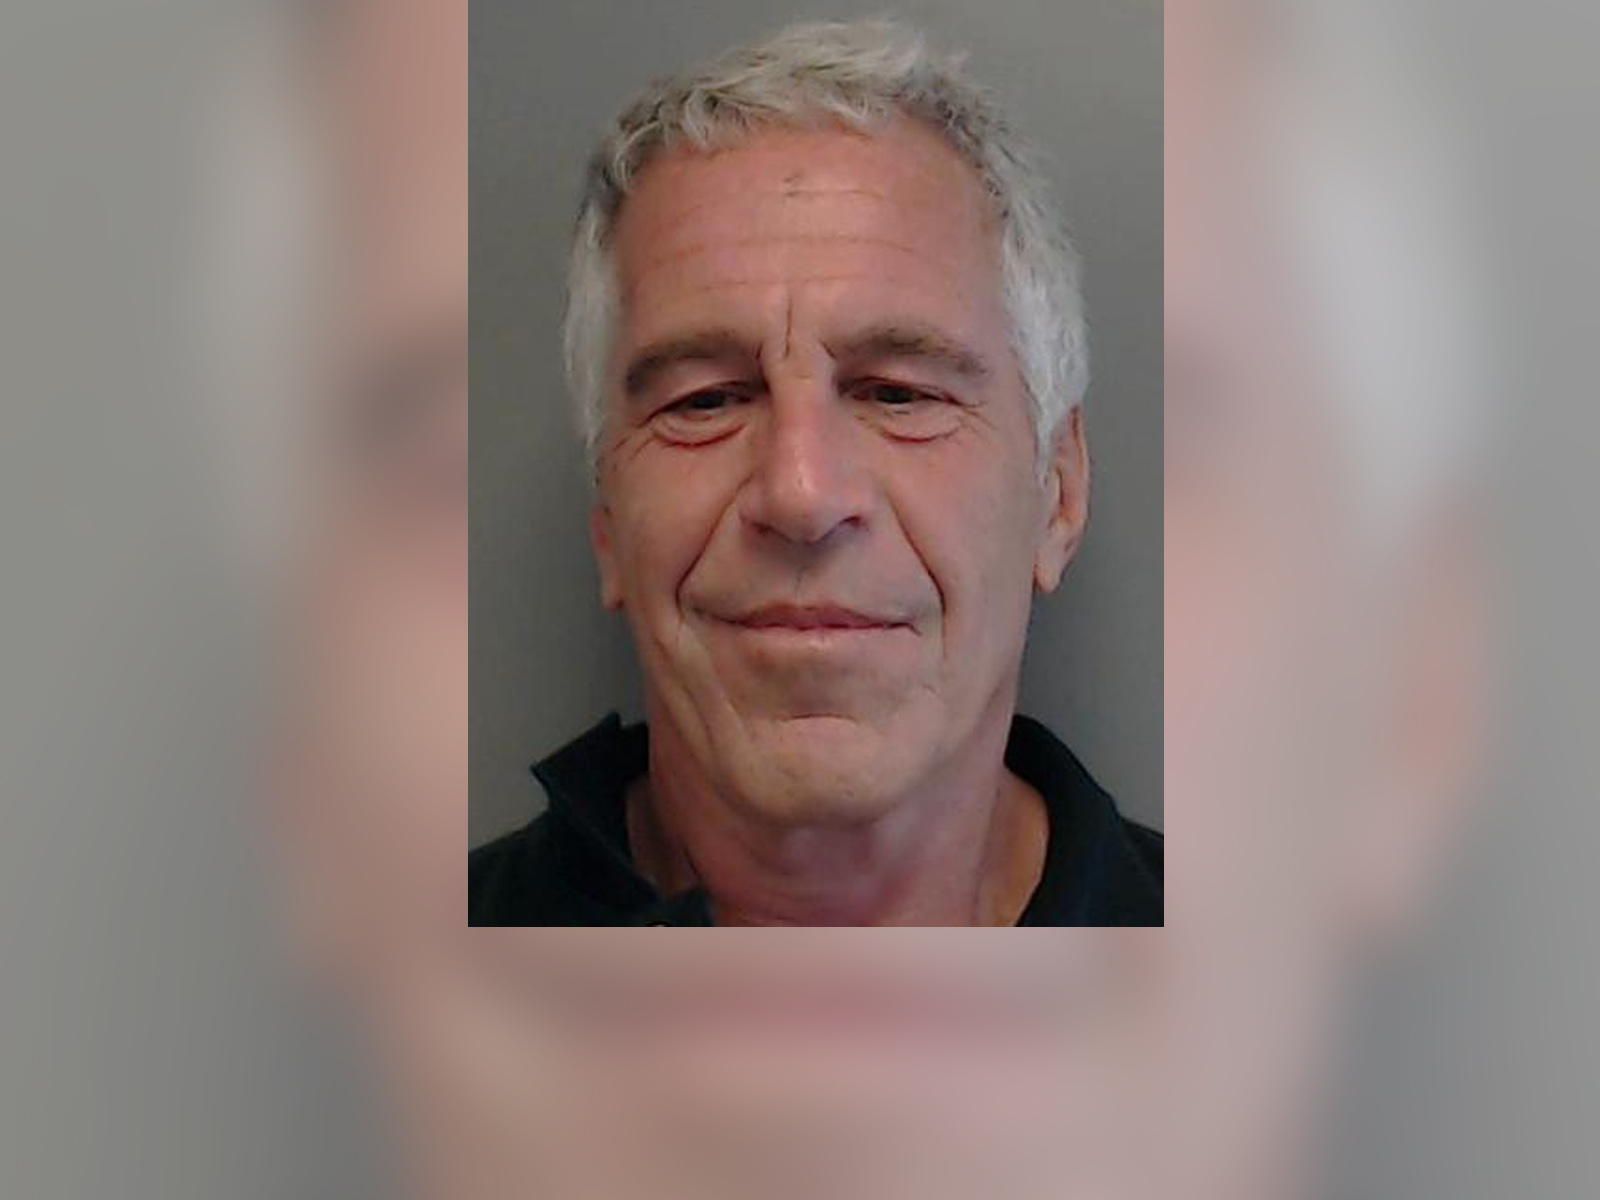 PHOTO: The mugshot of Jeffrey Epstein from the Florida Department of Law Enforcement where he is registered as a sex offender. 